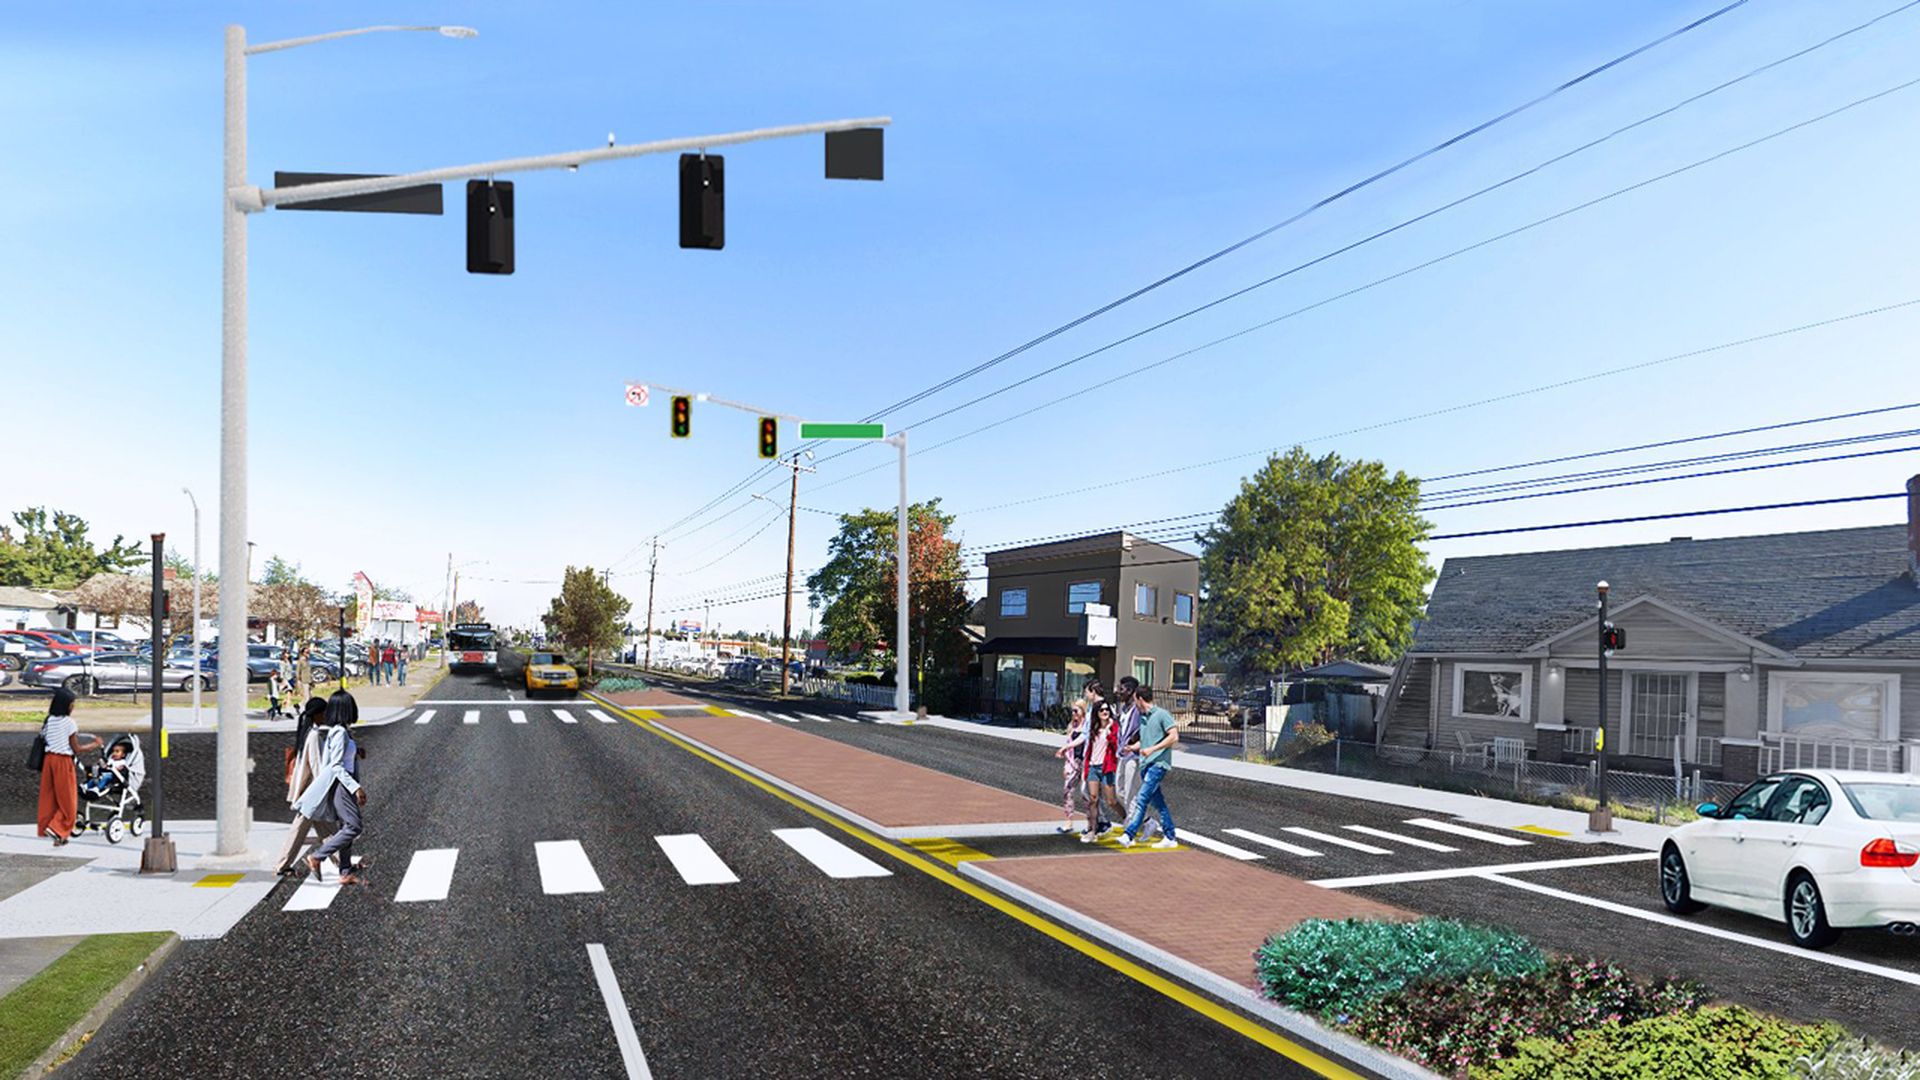 A rendering image of a street with two stoplights and people crossing a crosswalk.